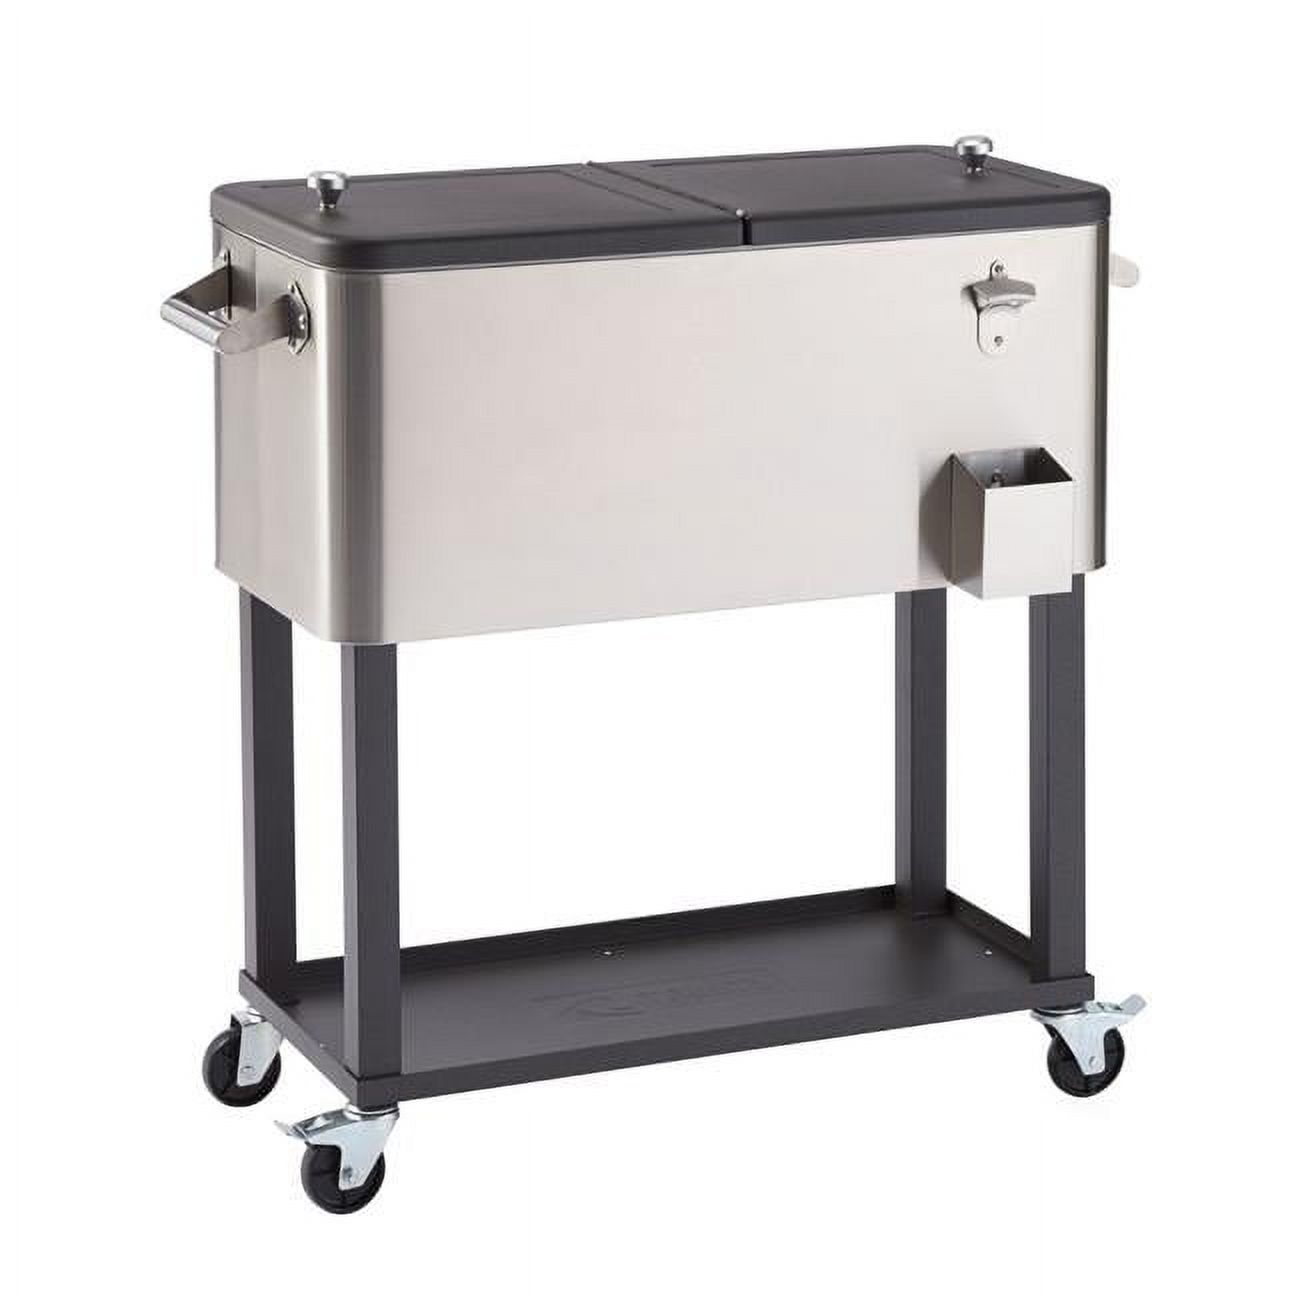 TRINITY 100 Quart Stainless Steel Cooler w/ Shelf - image 1 of 8